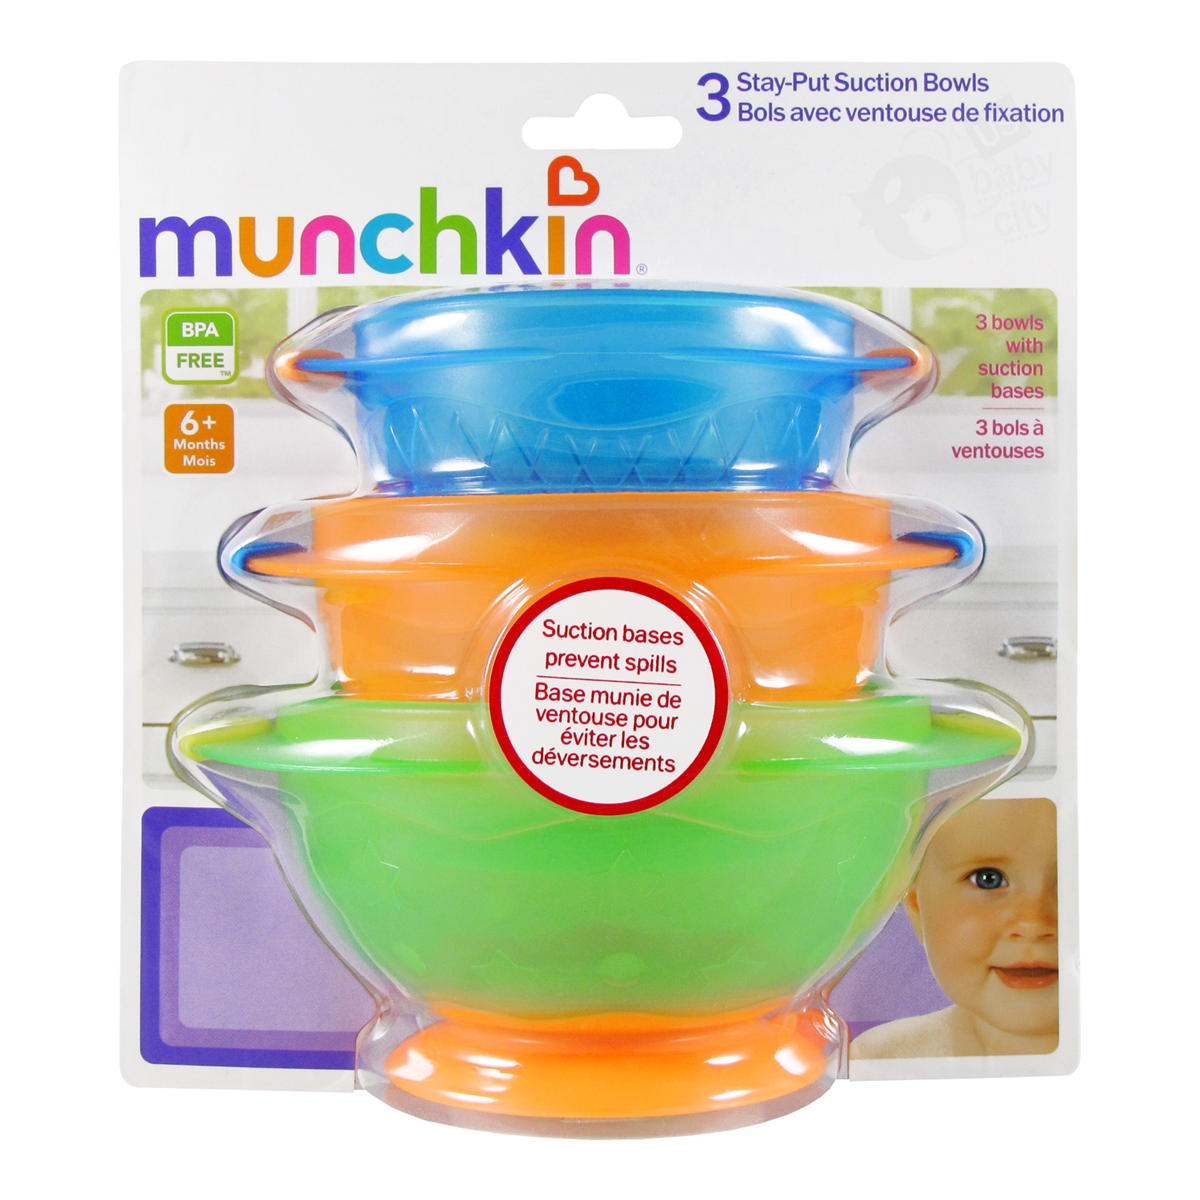 Stay-Put Suction Bowls 3 Pack (Munchkin)